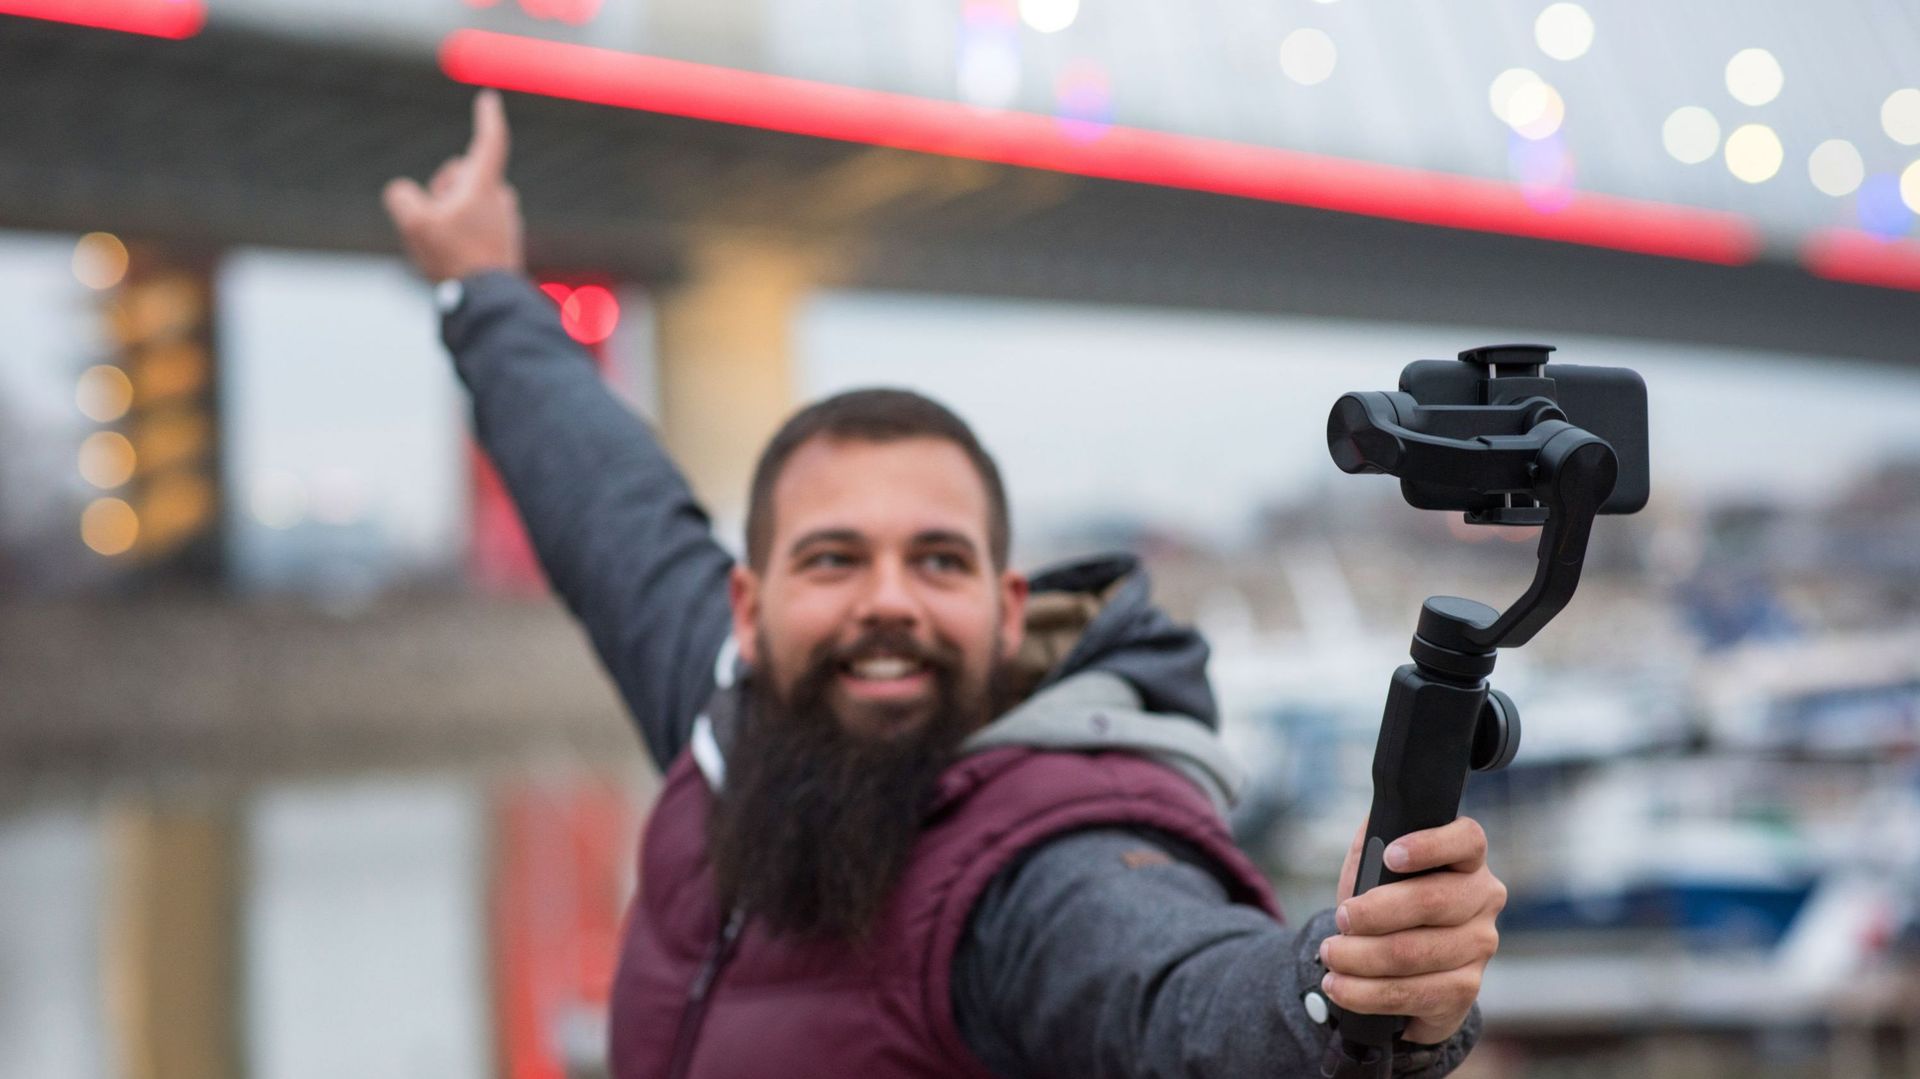 Man taking selfie with camera on the gimbal.